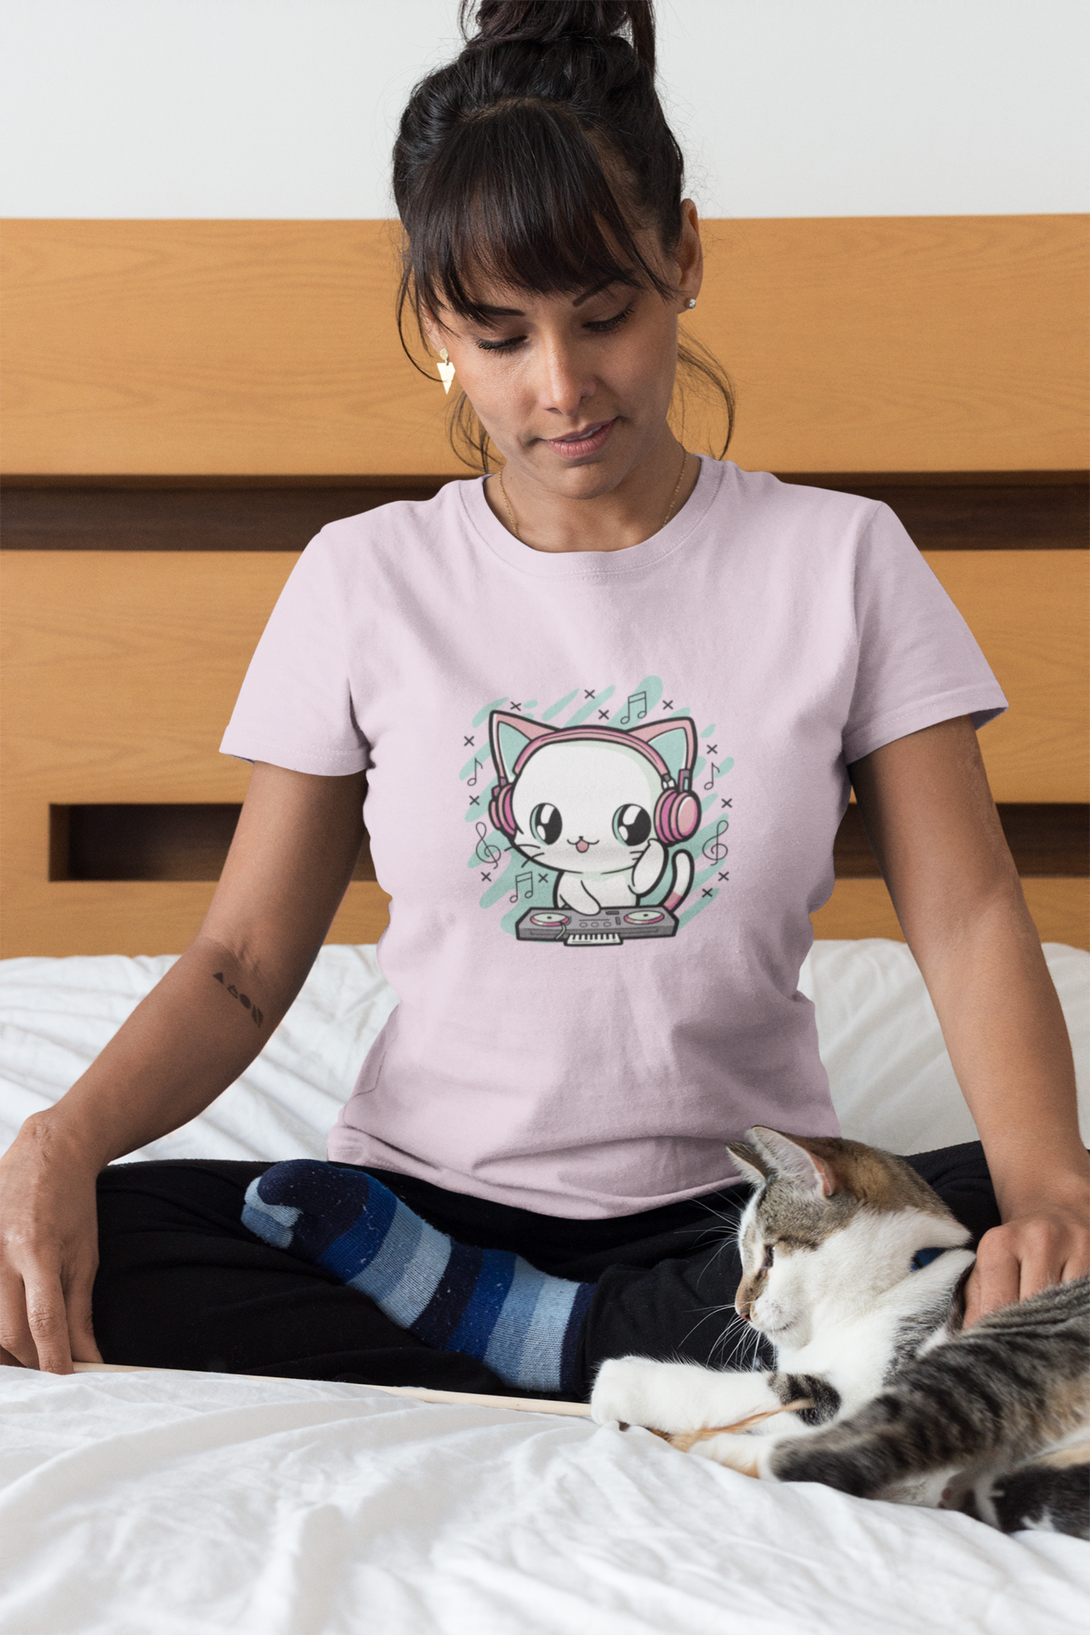 Meow Mix Printed T-Shirt For Women - WowWaves - 3